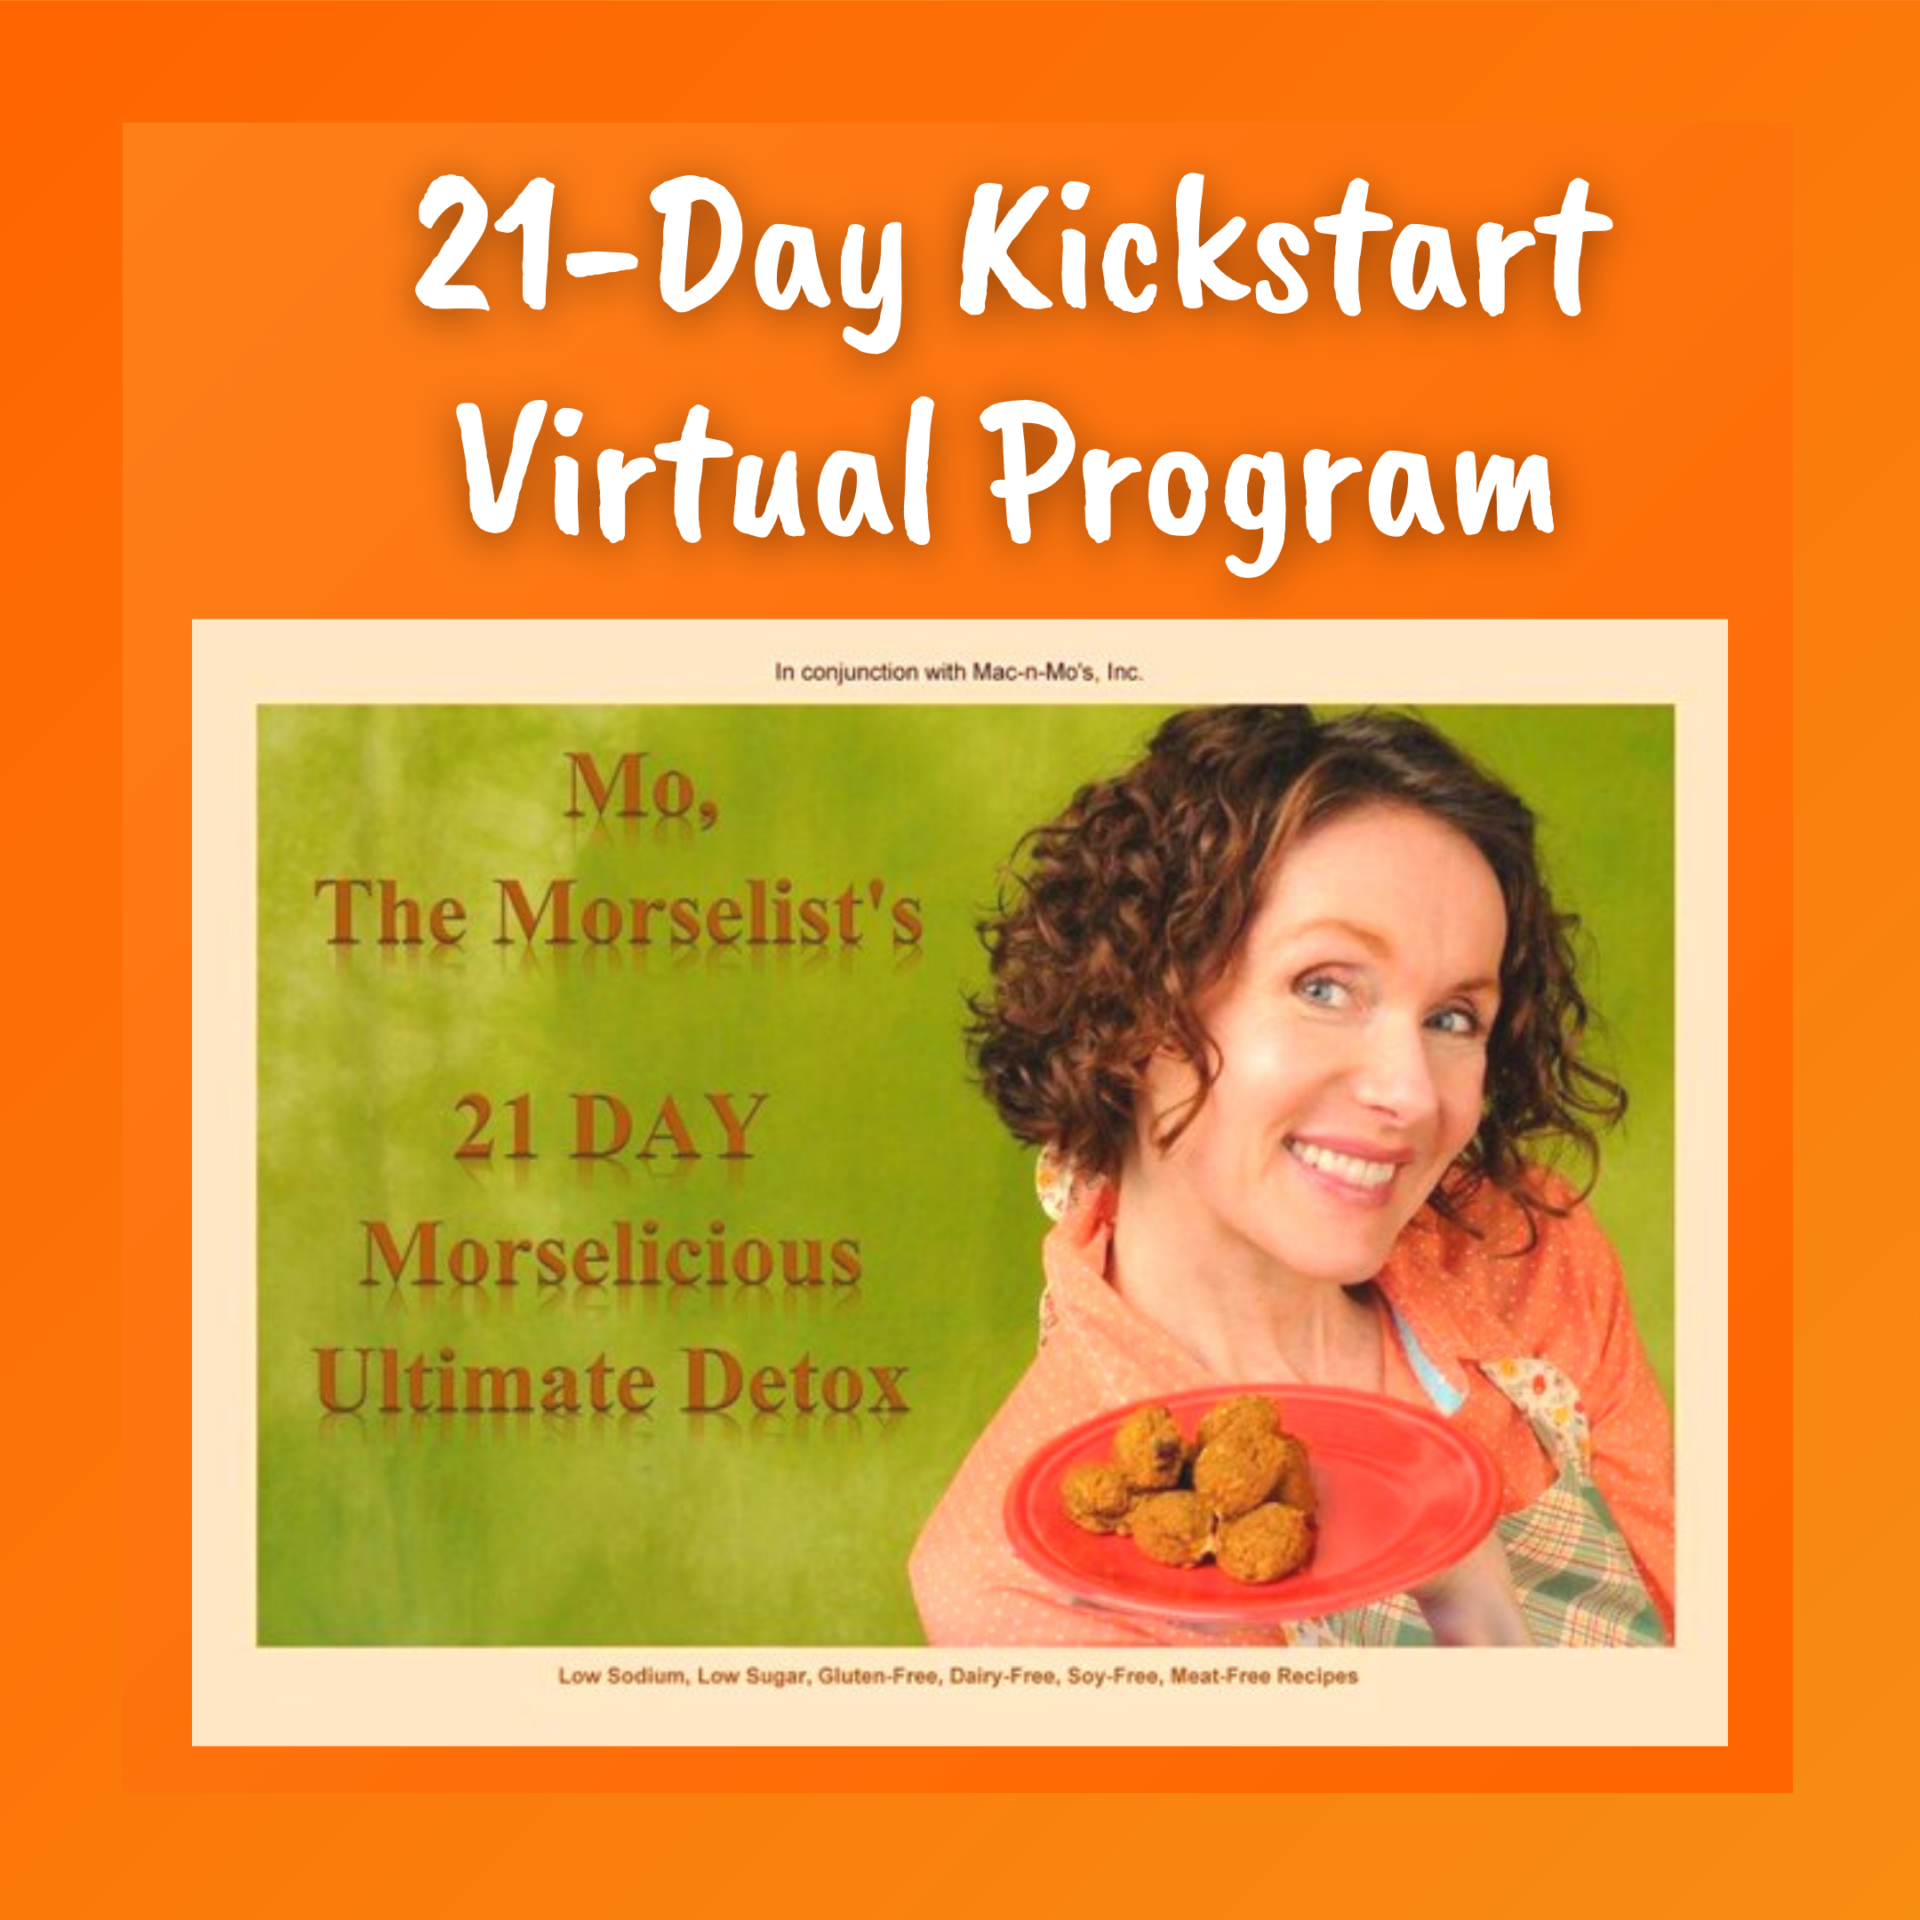 21-Day Kickstart Virtual Program. Mo holding a plate of her morsels on the cover of her 21 Day Morselicious Ultimate Detox cookbook.